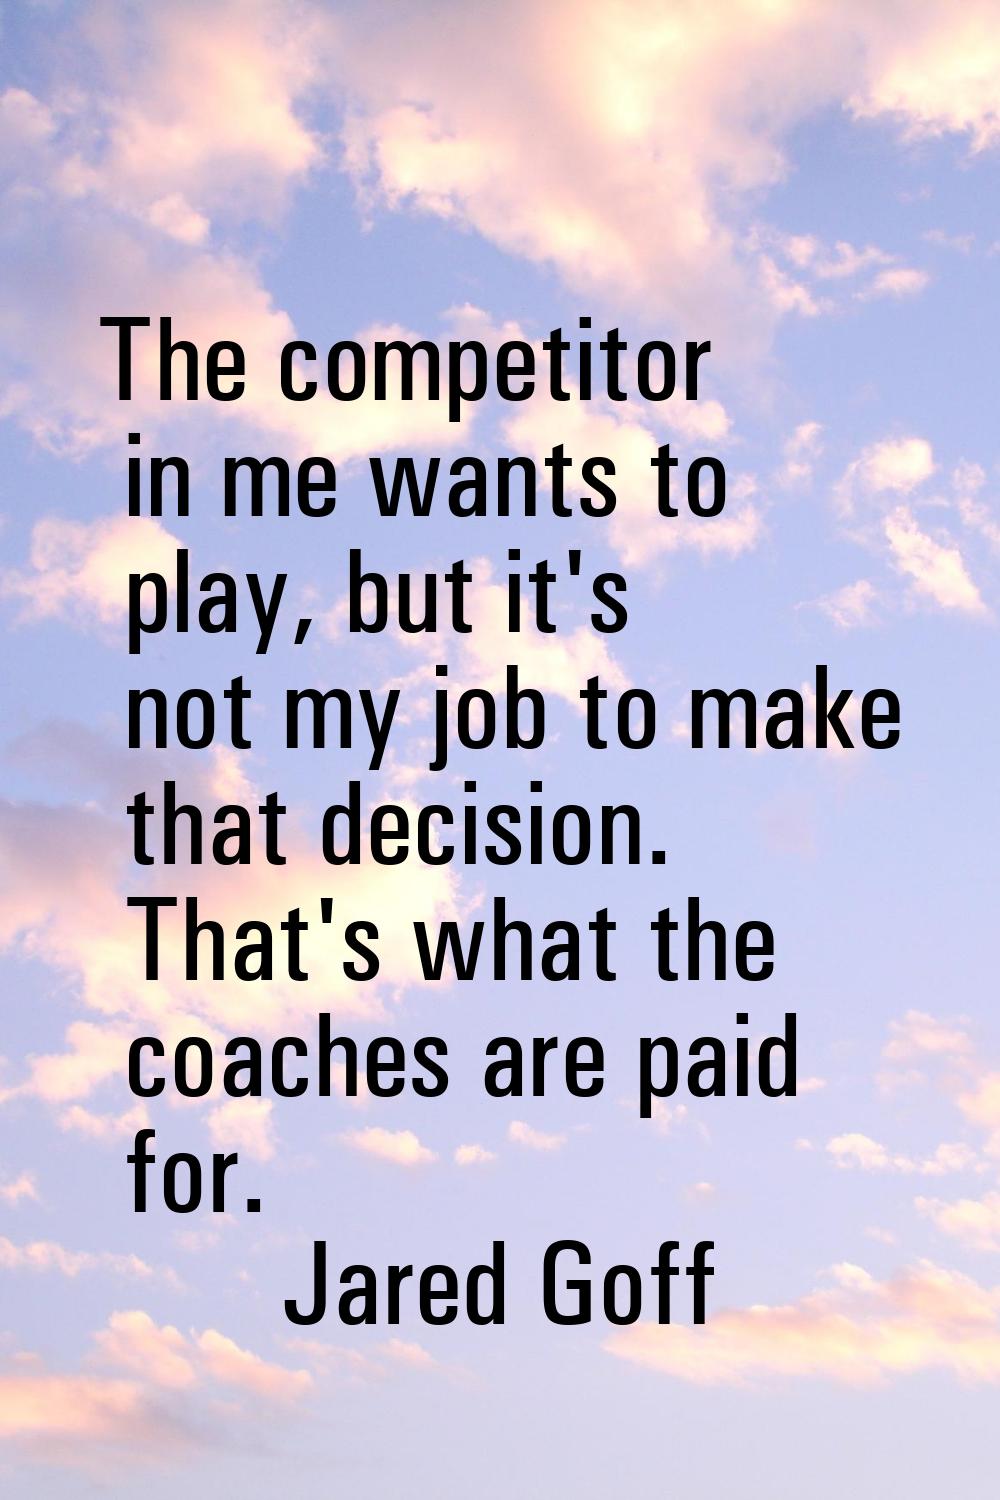 The competitor in me wants to play, but it's not my job to make that decision. That's what the coac